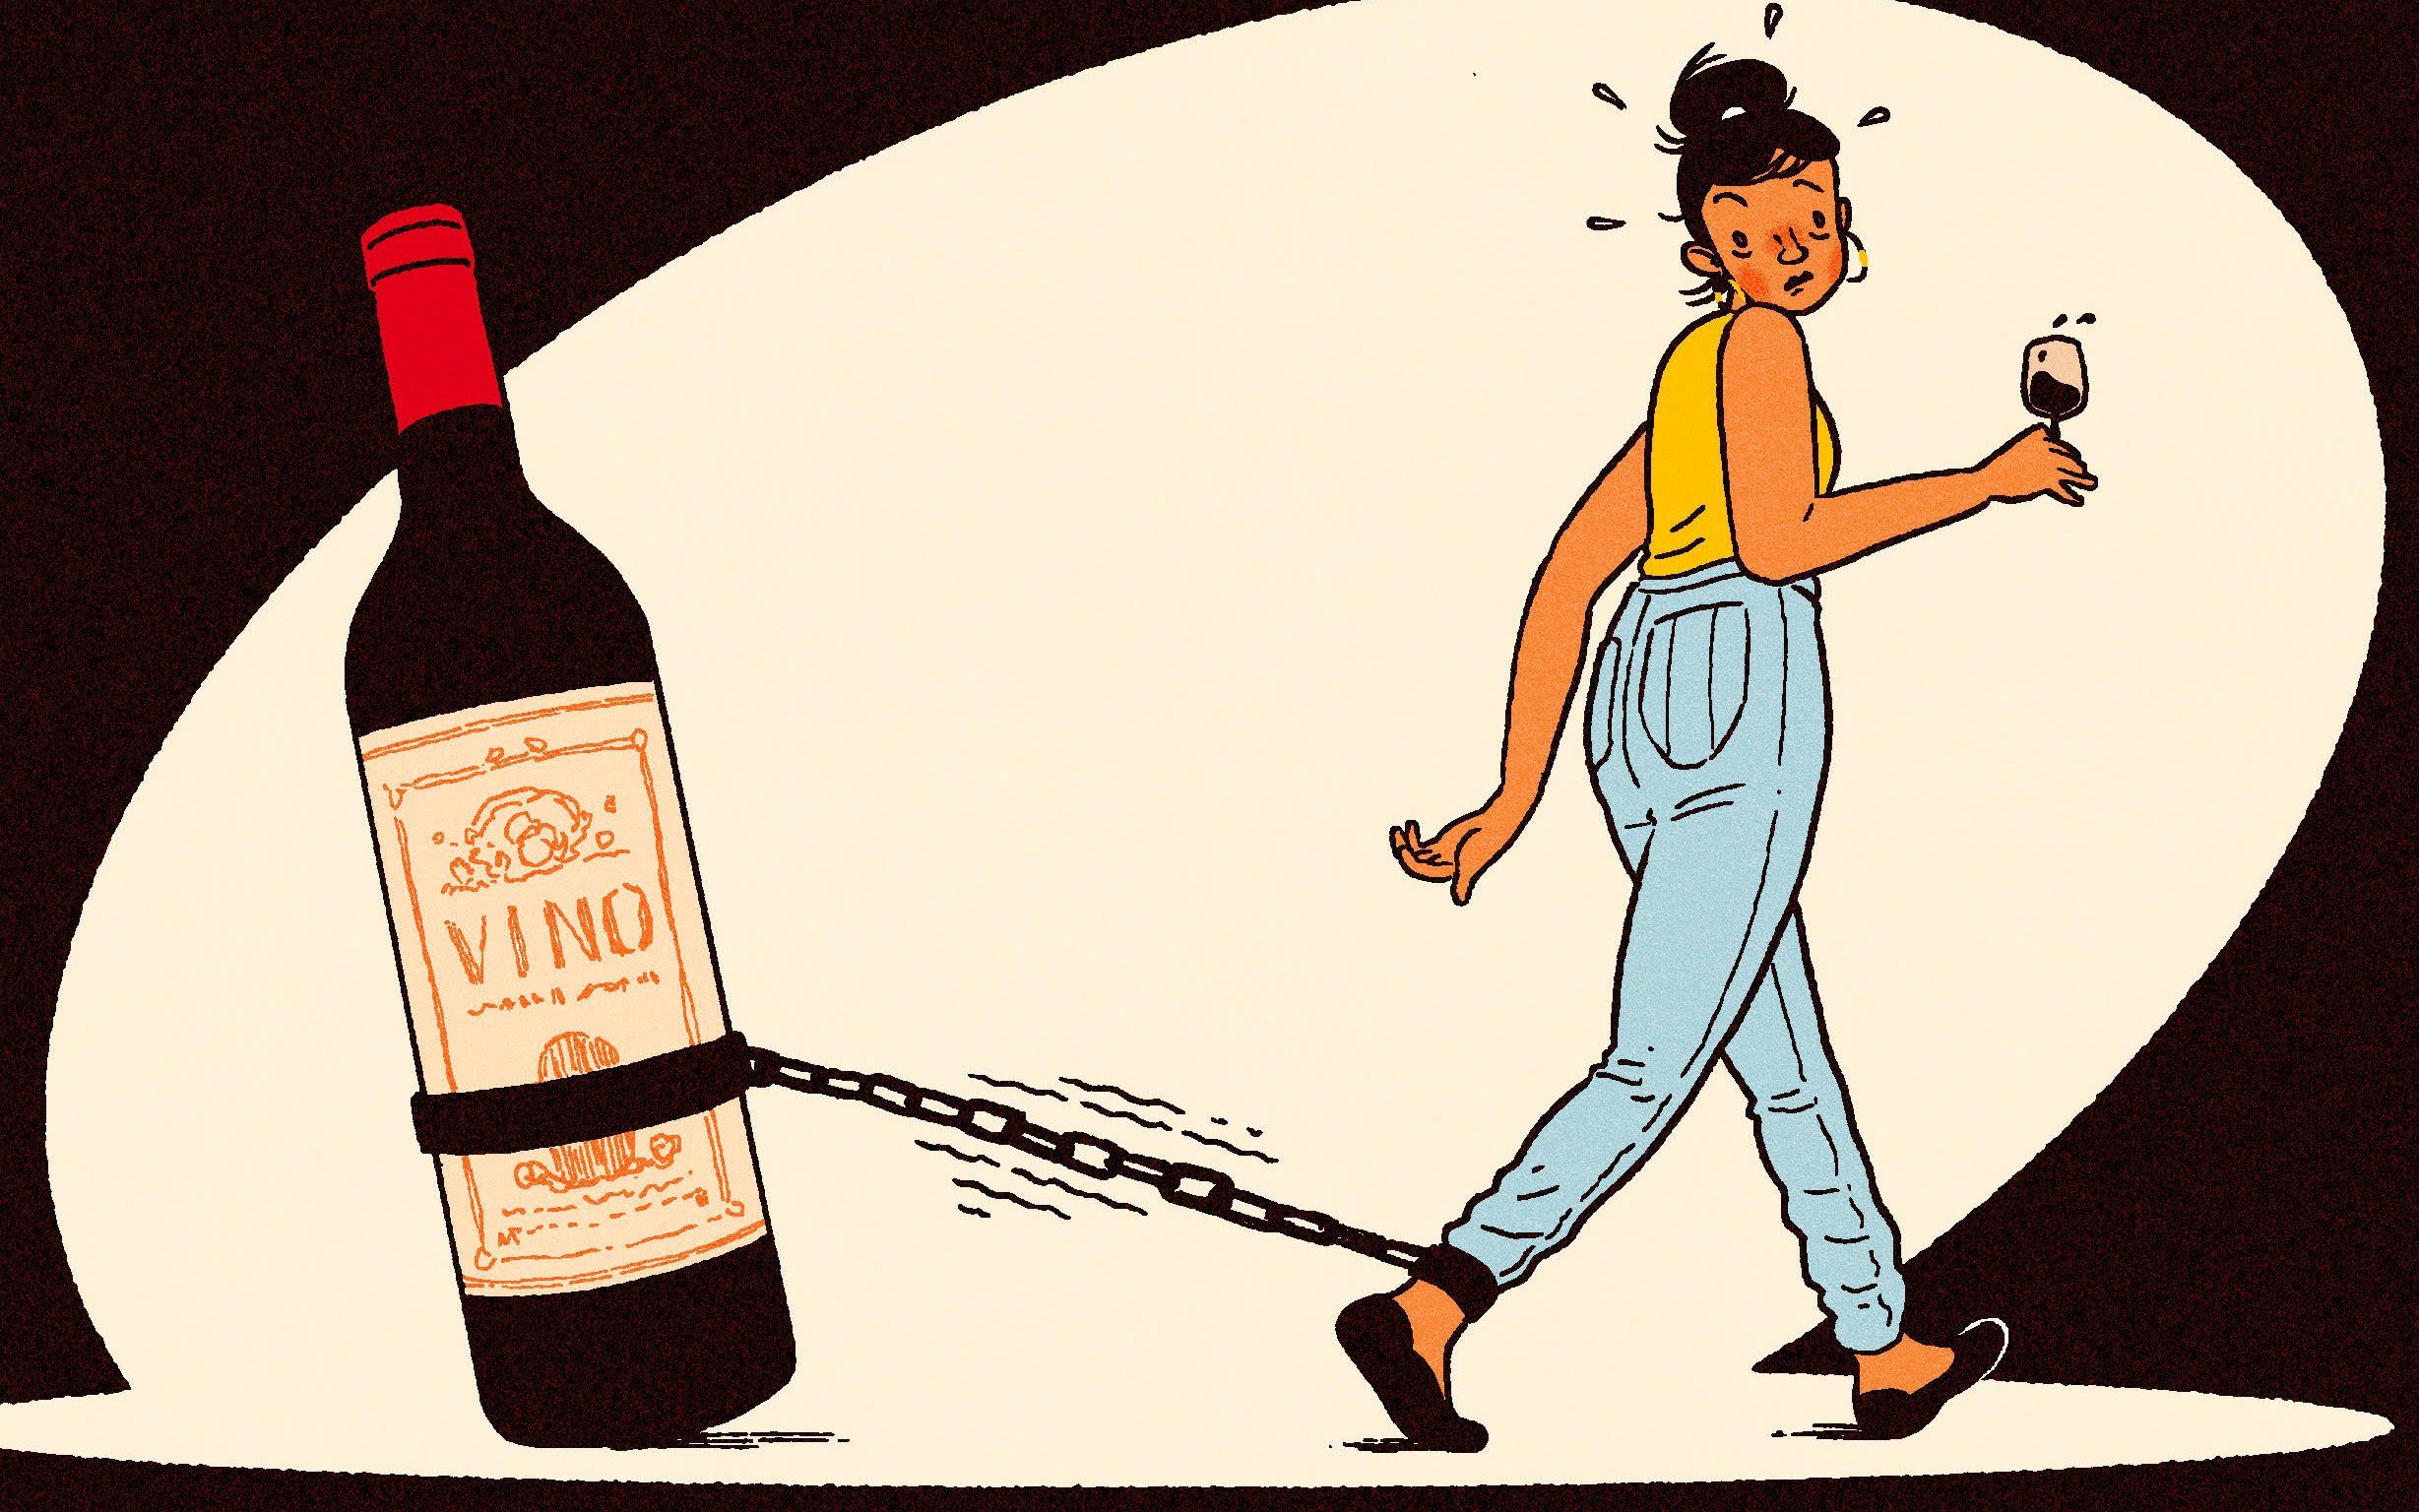 My friends are worried about my drinking – but how do I know if I have a problem?